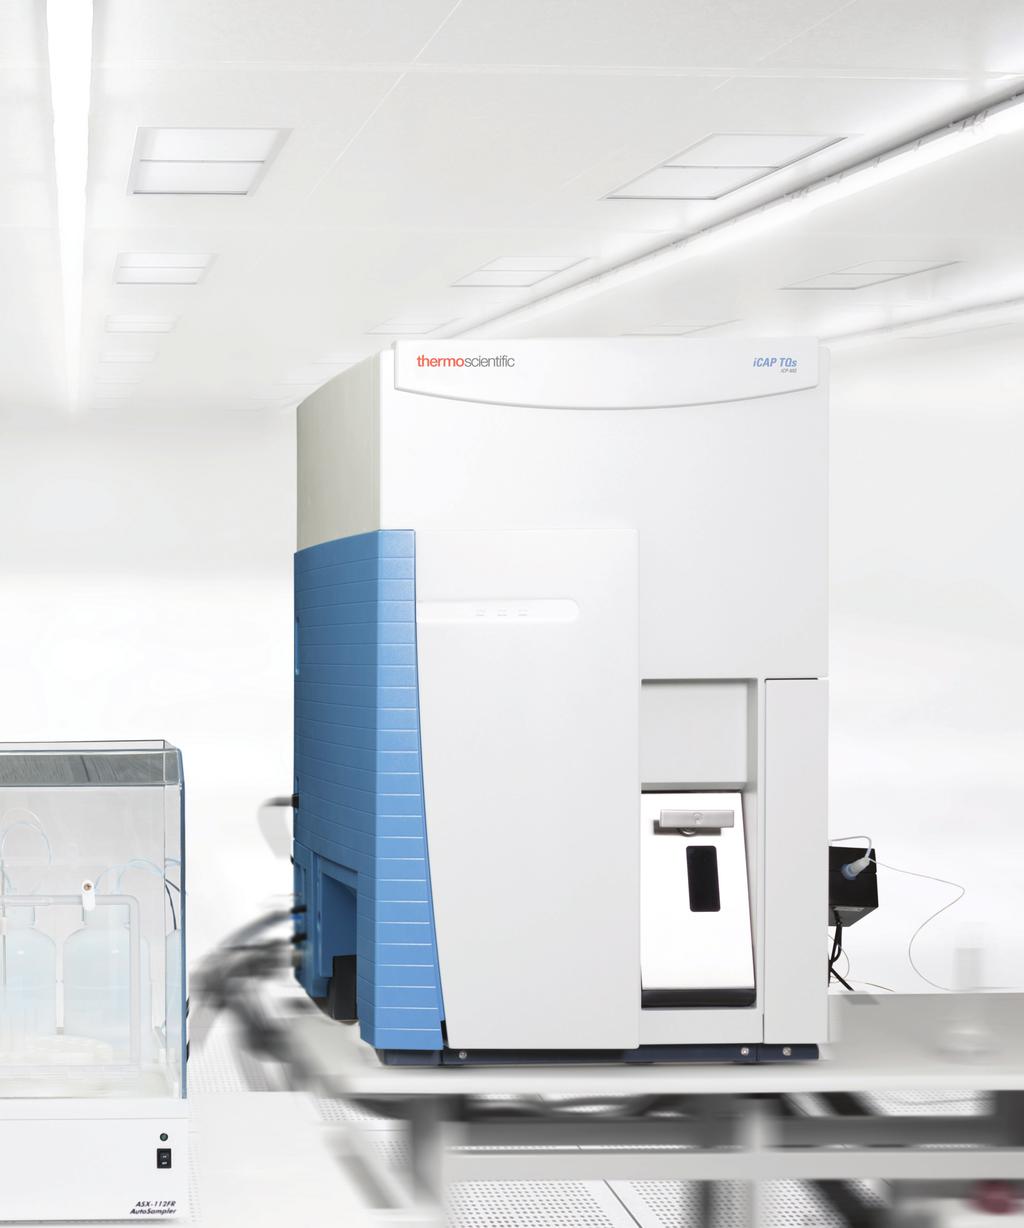 Push the boundaries of detection with triple quadrupole ICP-MS performance and ease-of-use for QA/QC analysis in the wafer fabrication process with the icap TQs ICP-MS: Powerful triple quadrupole